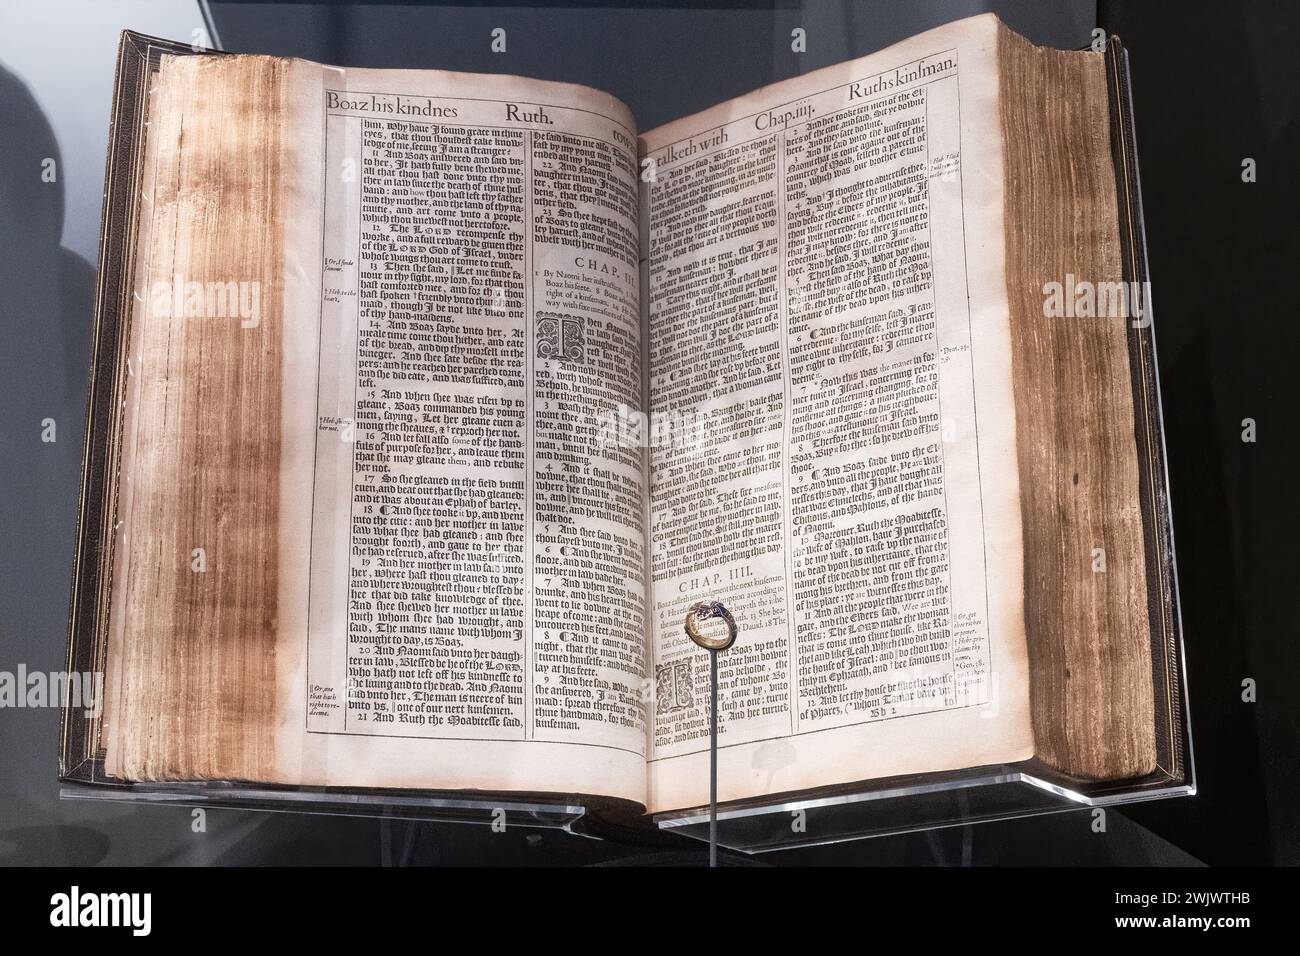 King James Bible on display at Winchester Cathedral in the Kings and Scribes exhibition, Hampshire, England, UK Stock Photo